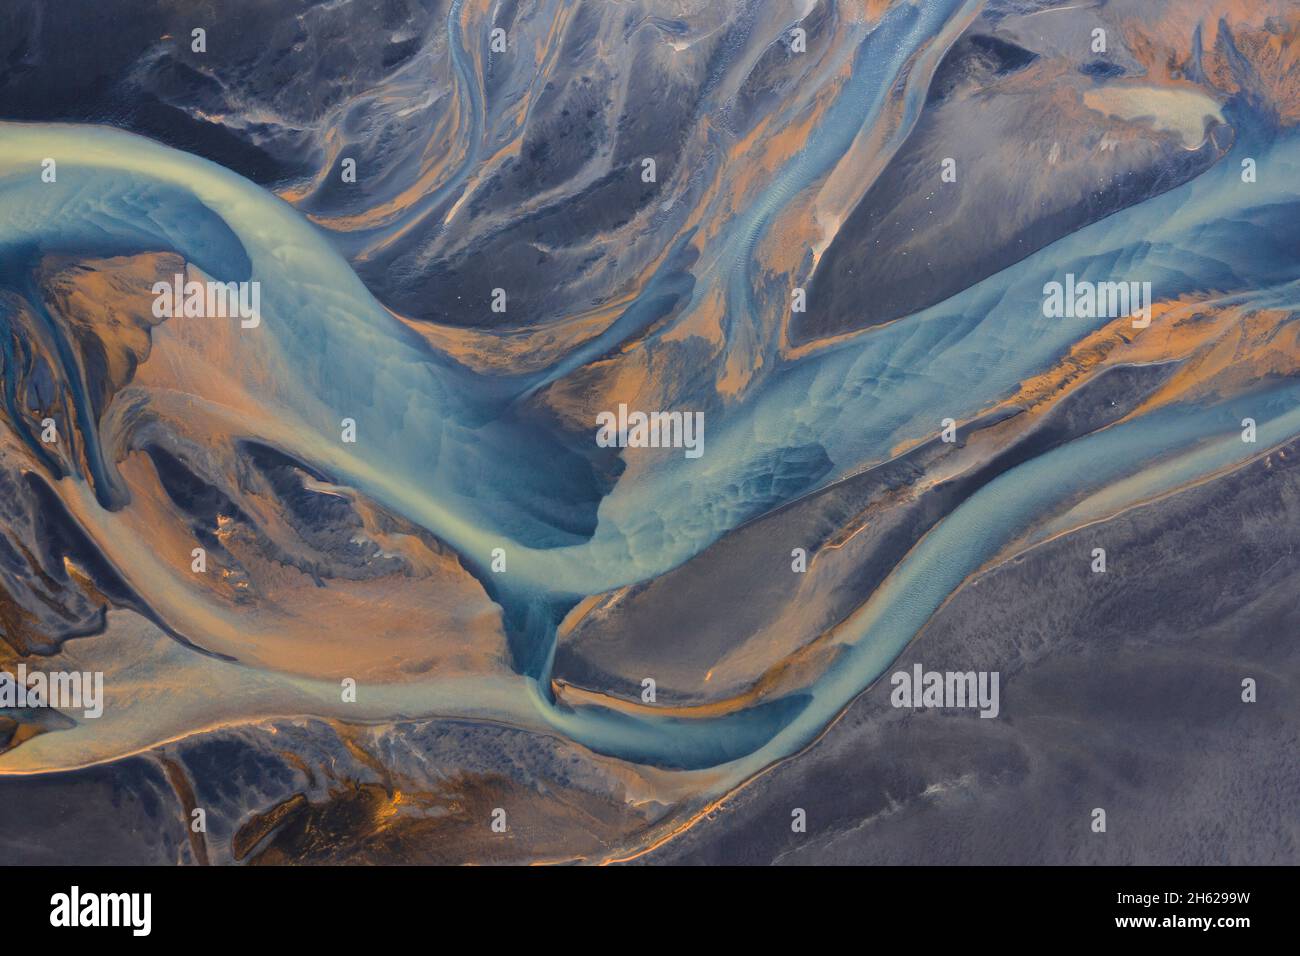 bird's-eye view of abstract river landscape. Stock Photo